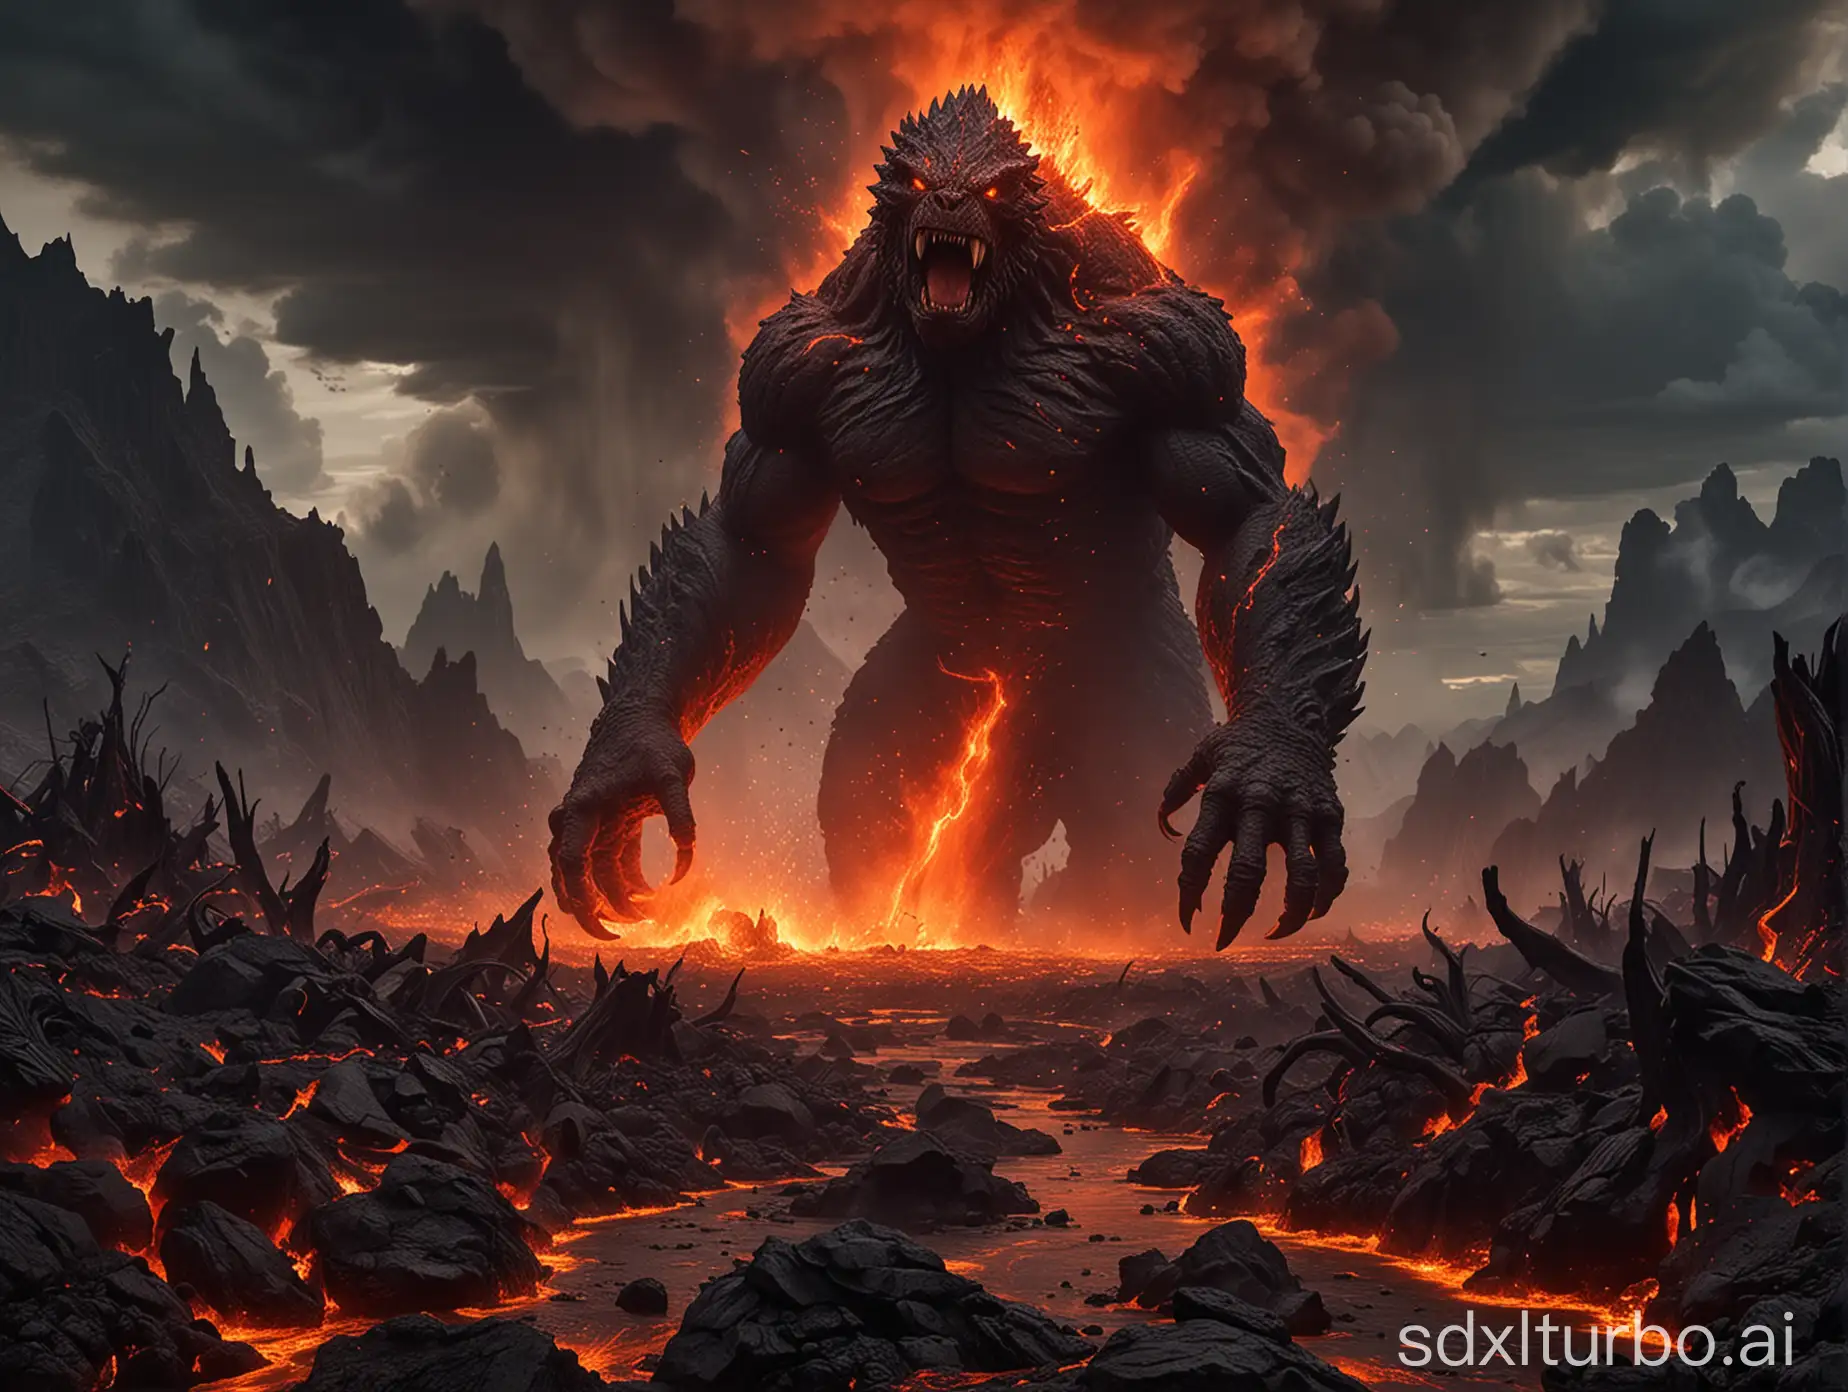 Majestic-Birth-of-a-Lava-Monster-Amidst-Volcanic-Fury